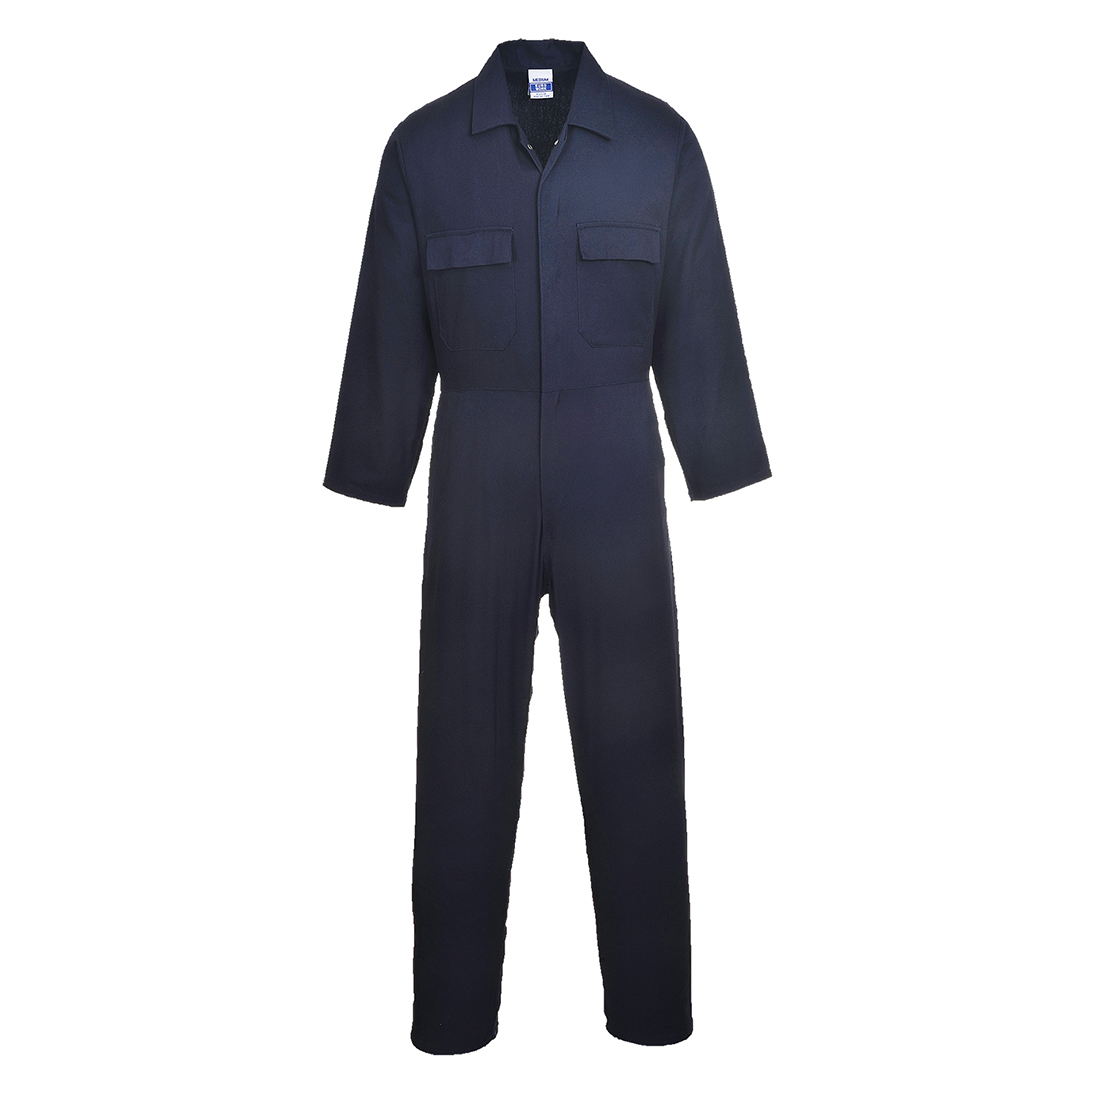 S998 Portwest® 100% Cotton Workwear Coveralls - navy